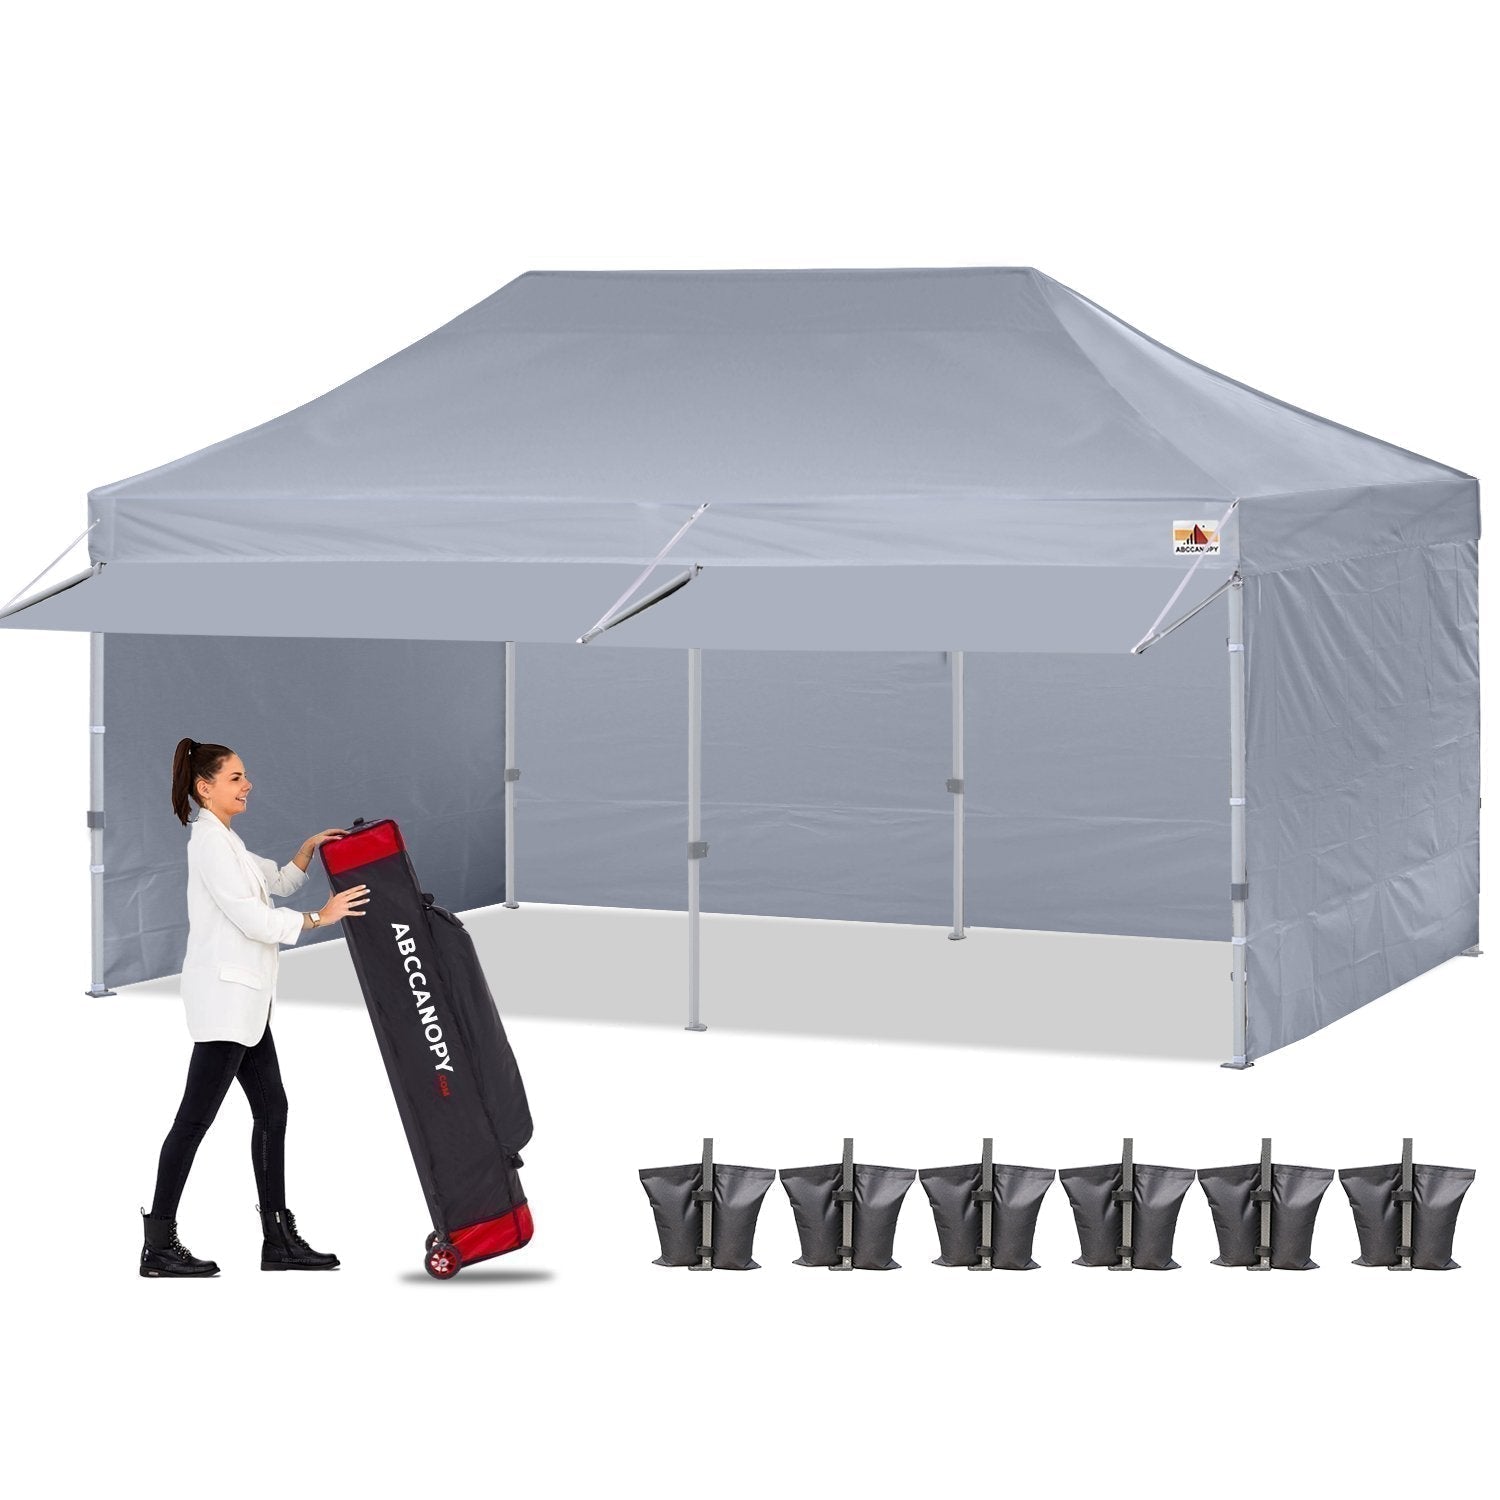 Awning Pop-up Canopy(Package) - ABC-CANOPY